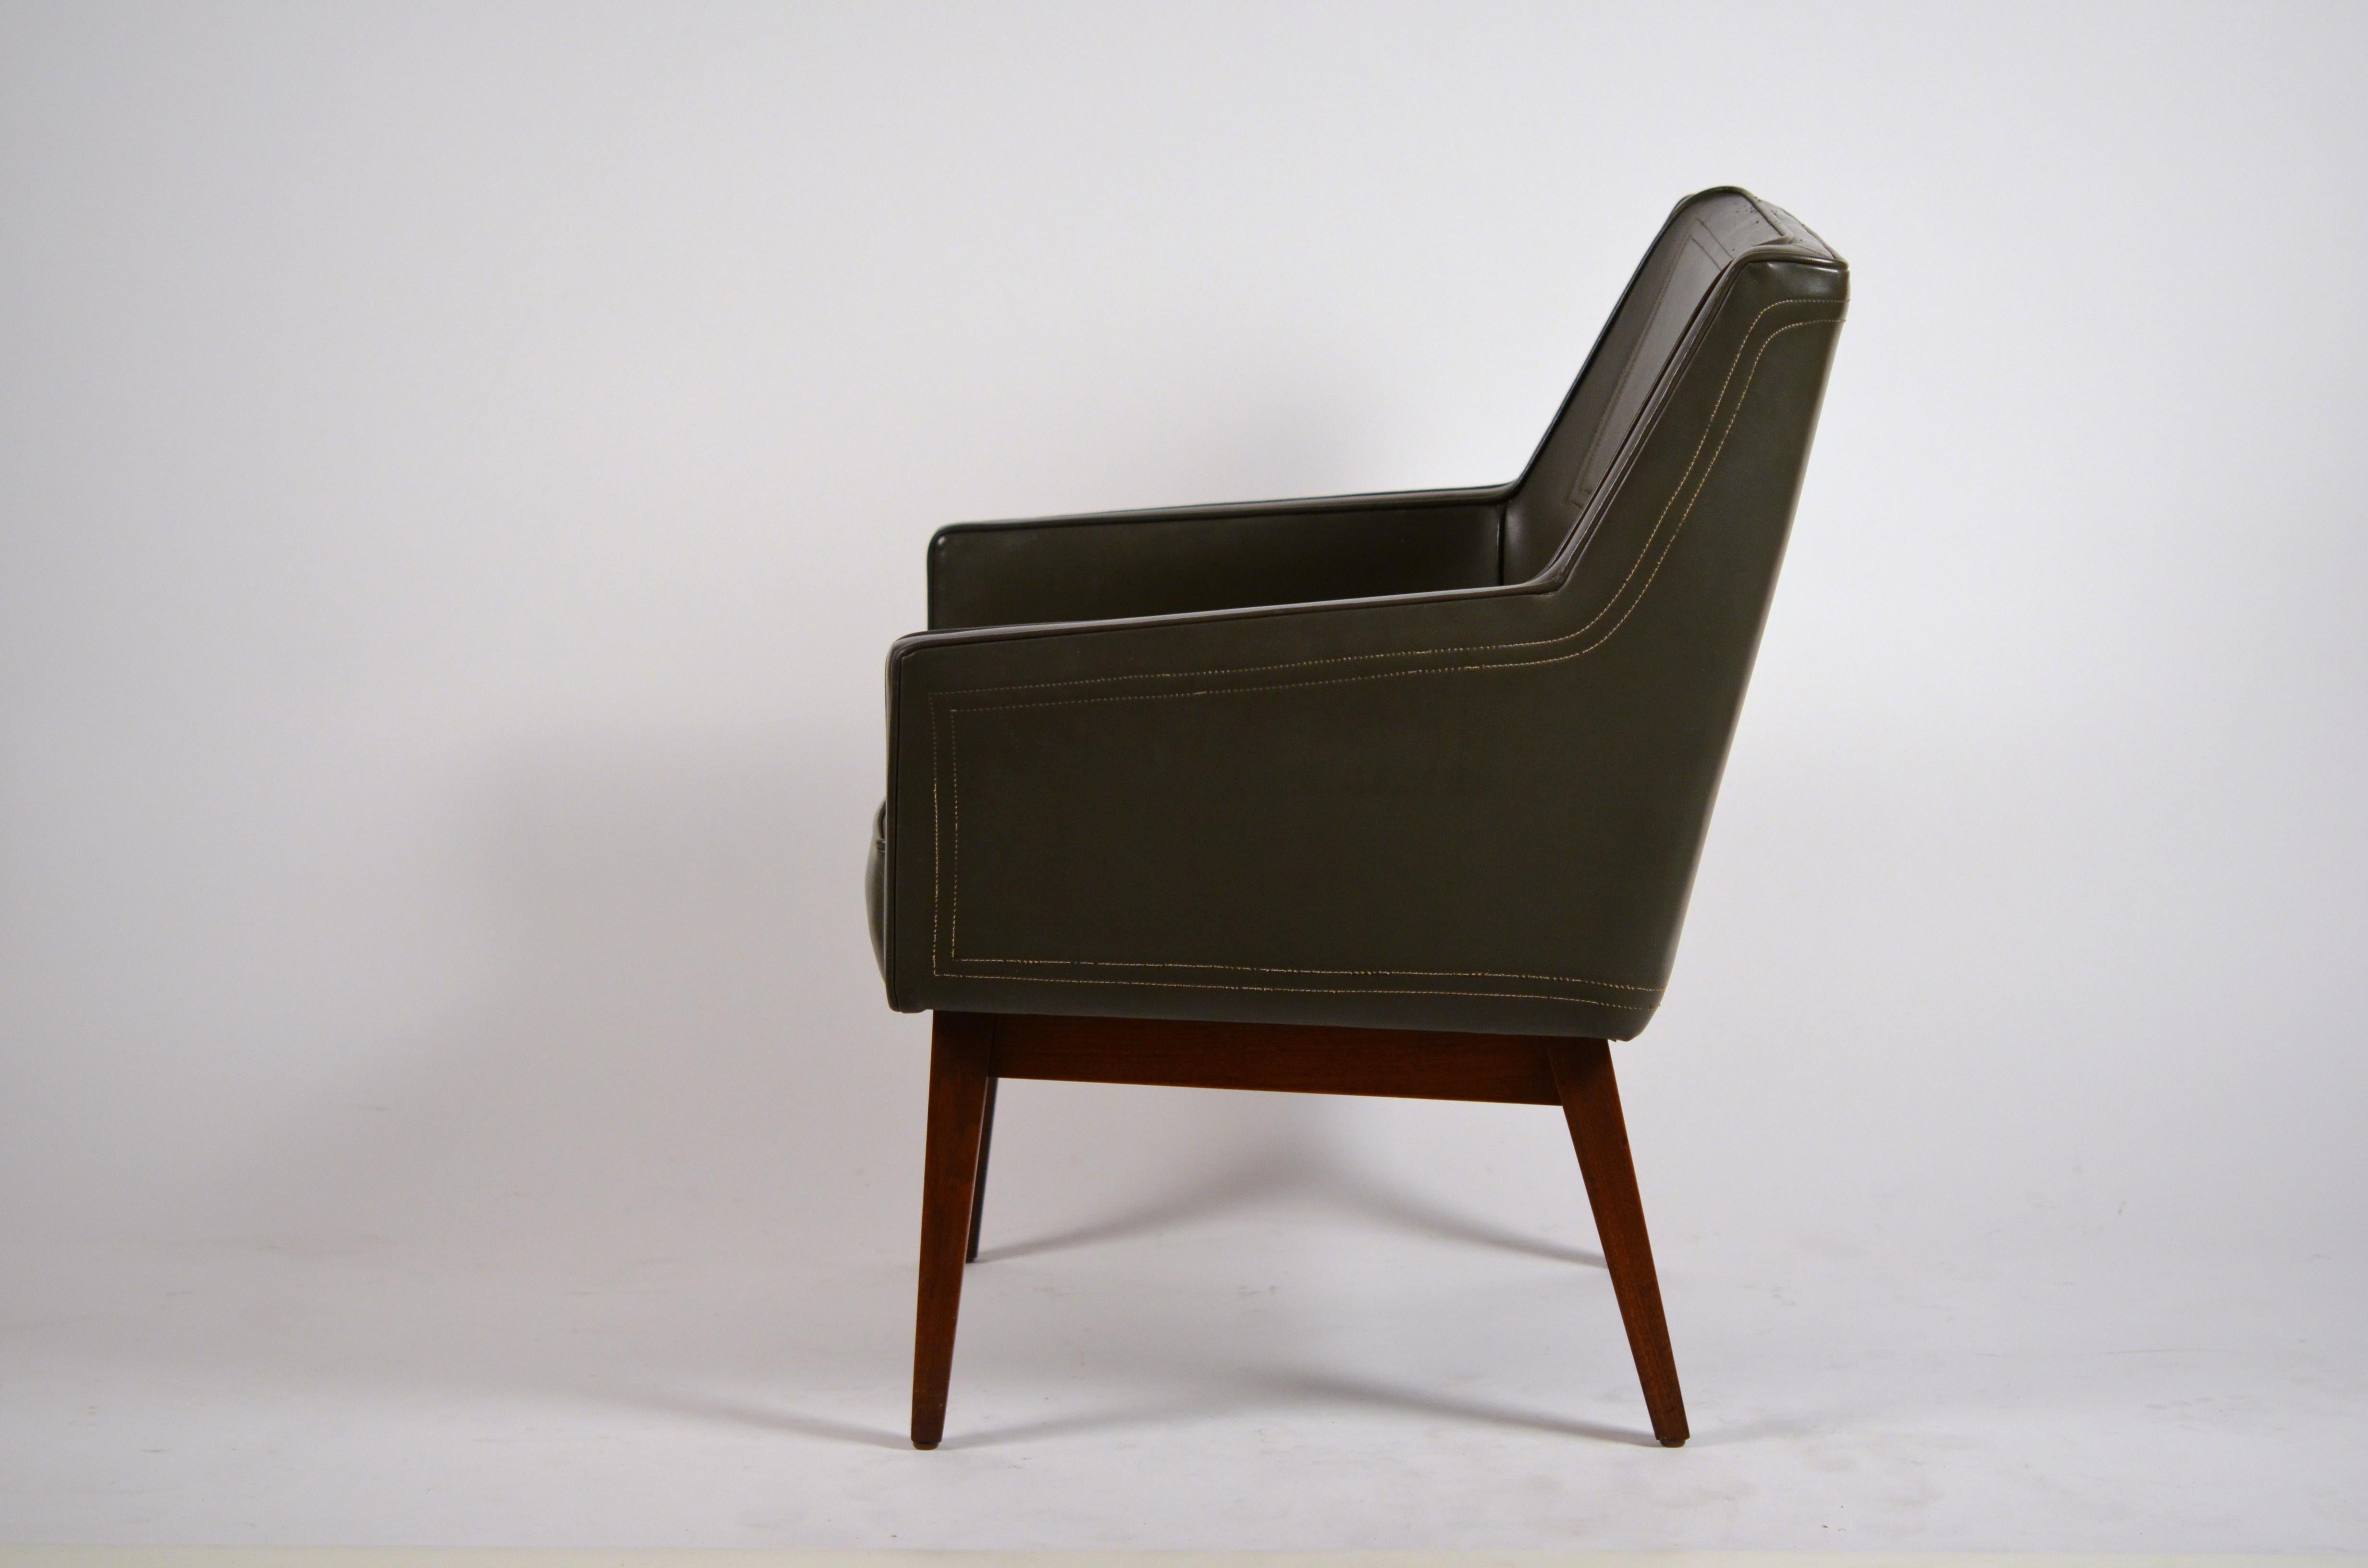 Mid-20th Century Pair of Early Modernist Armchairs by Vista of California for Stow Davis